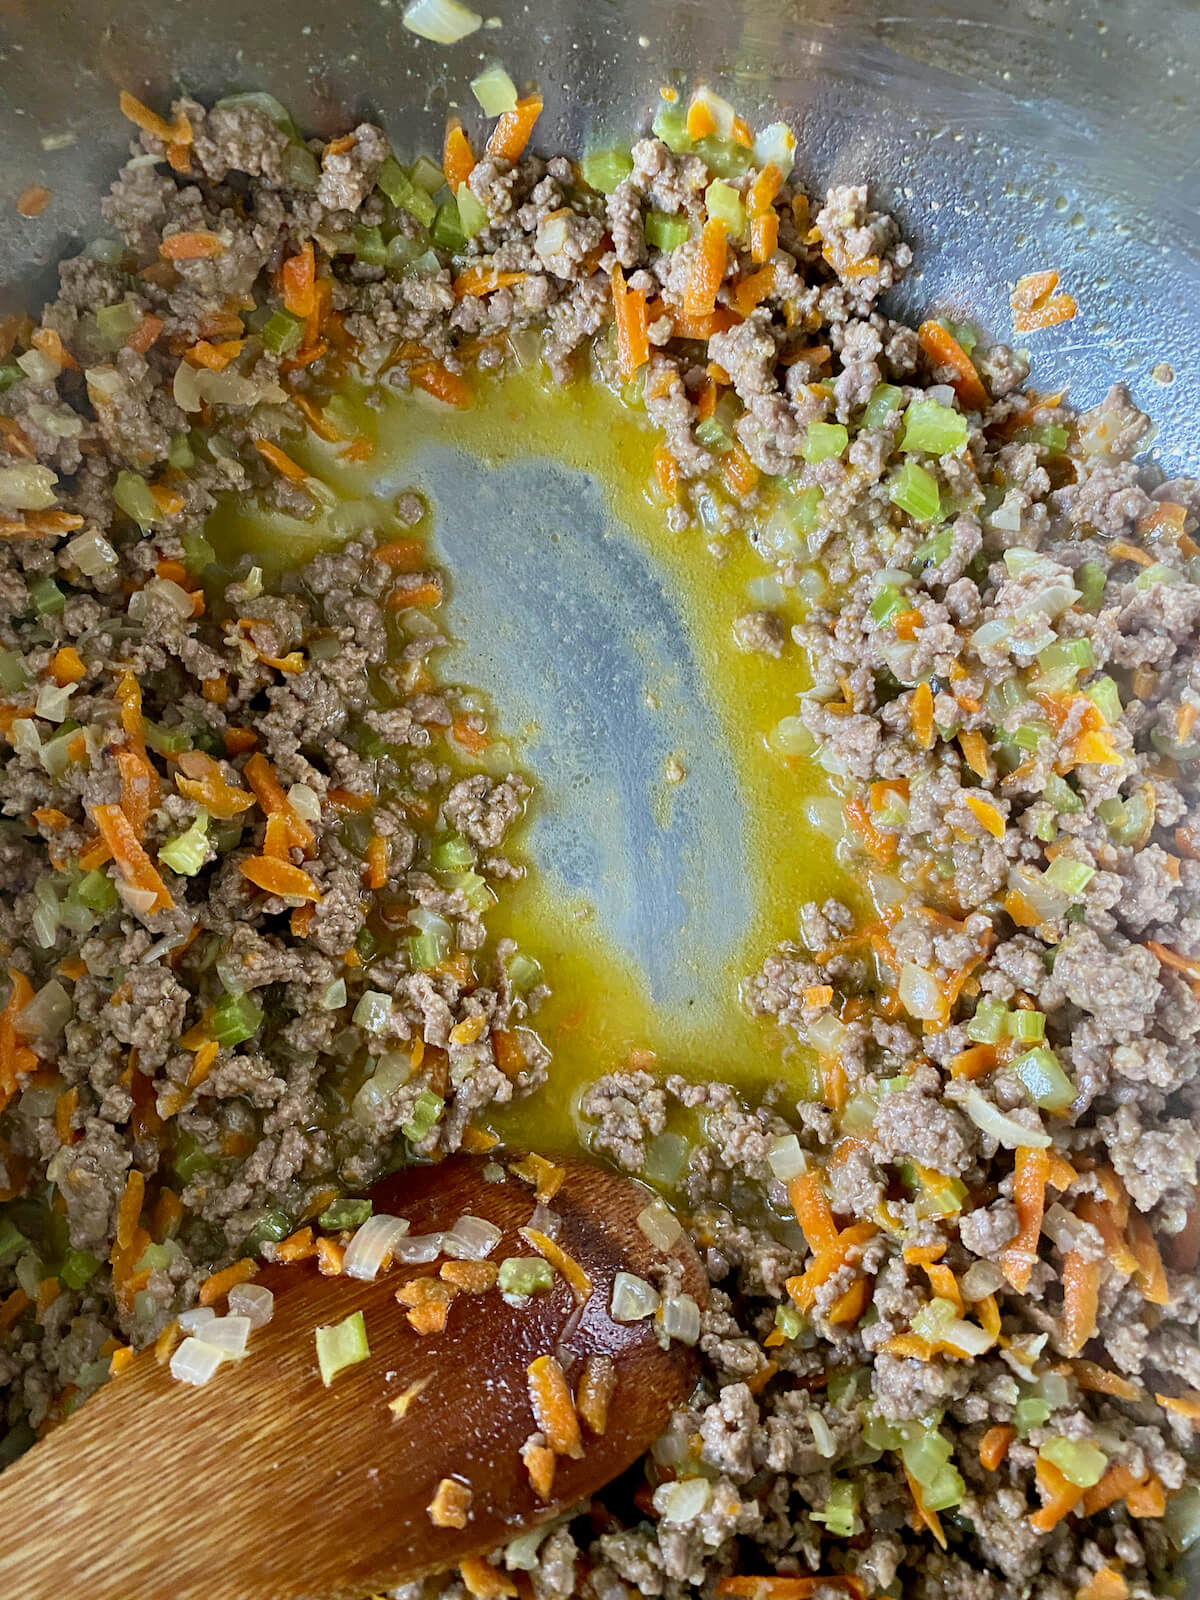 Ground beef and vegetables after simmering in milk. There is a wooden spoon pushing some of the ground beef mixture aside to show that the milk has been reduced in the pan.